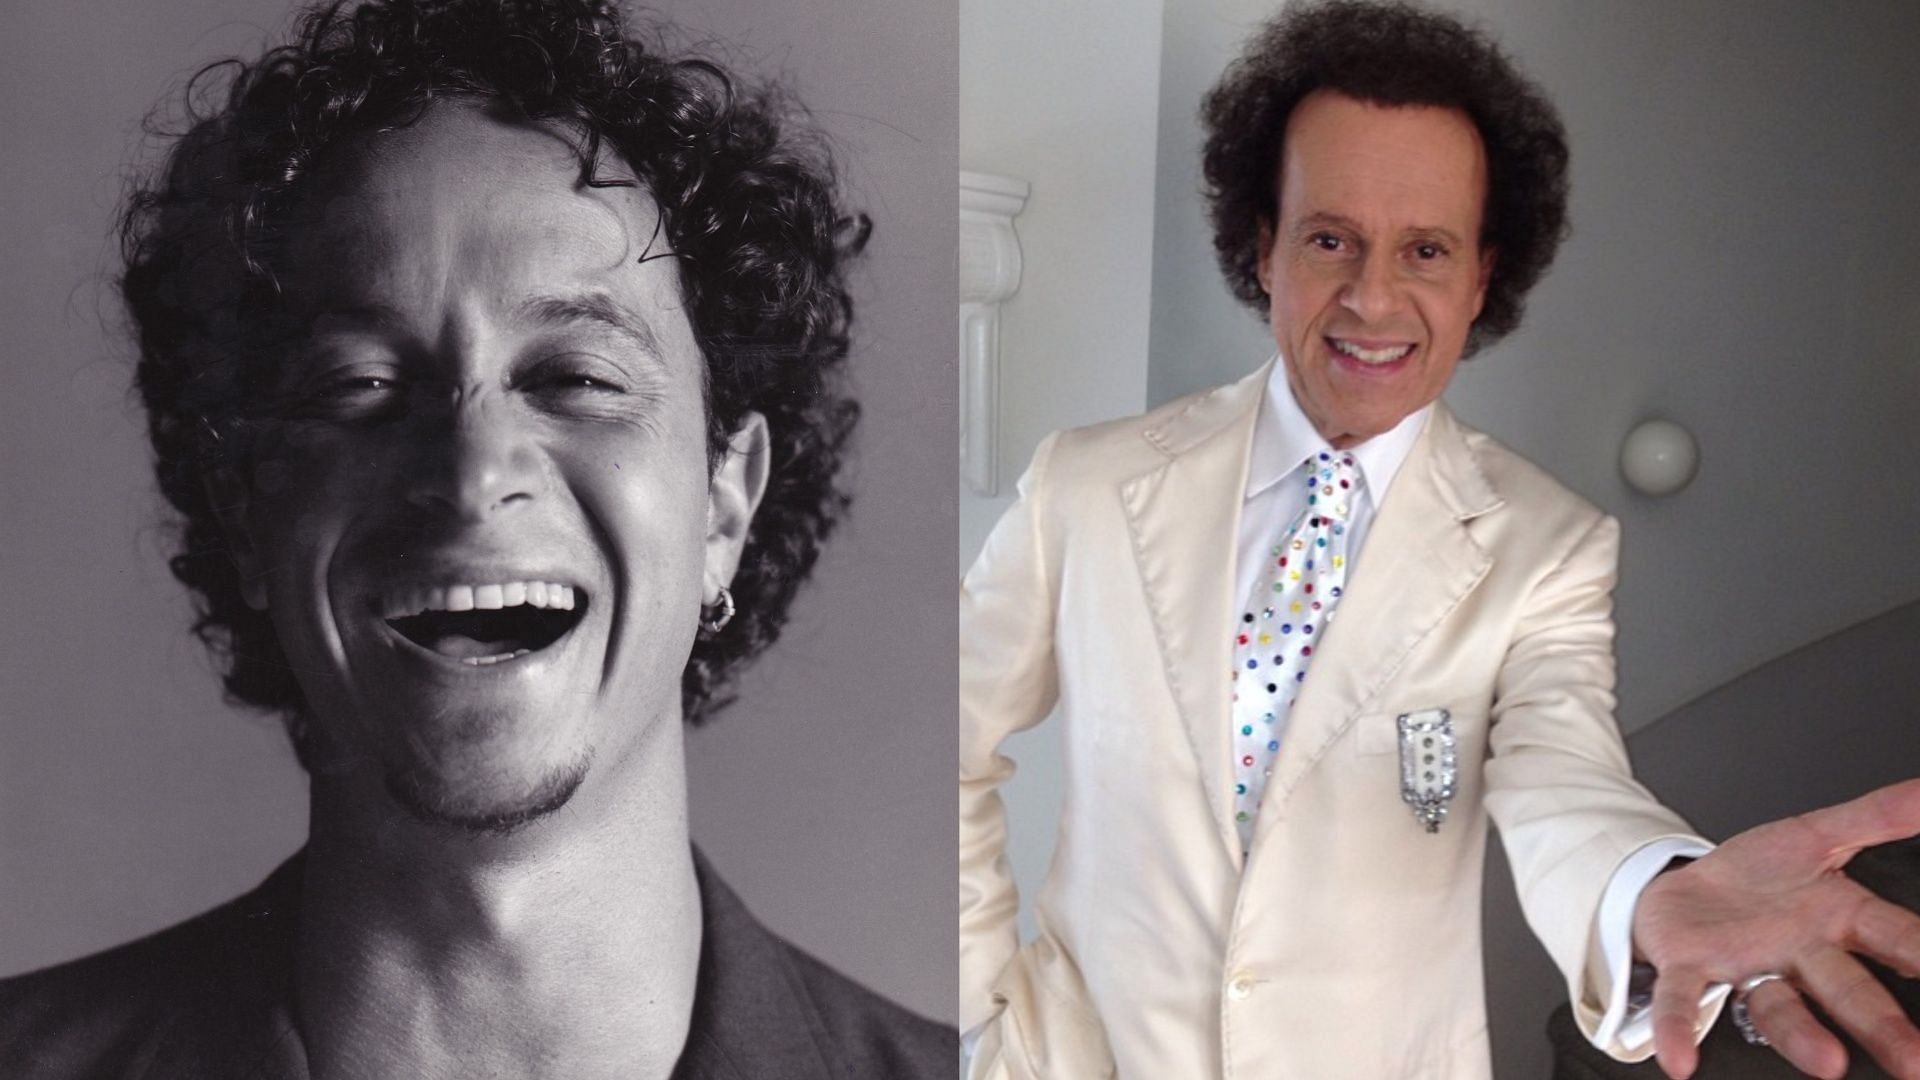 Pauly Shore was left heartbroken after Richard Simmons